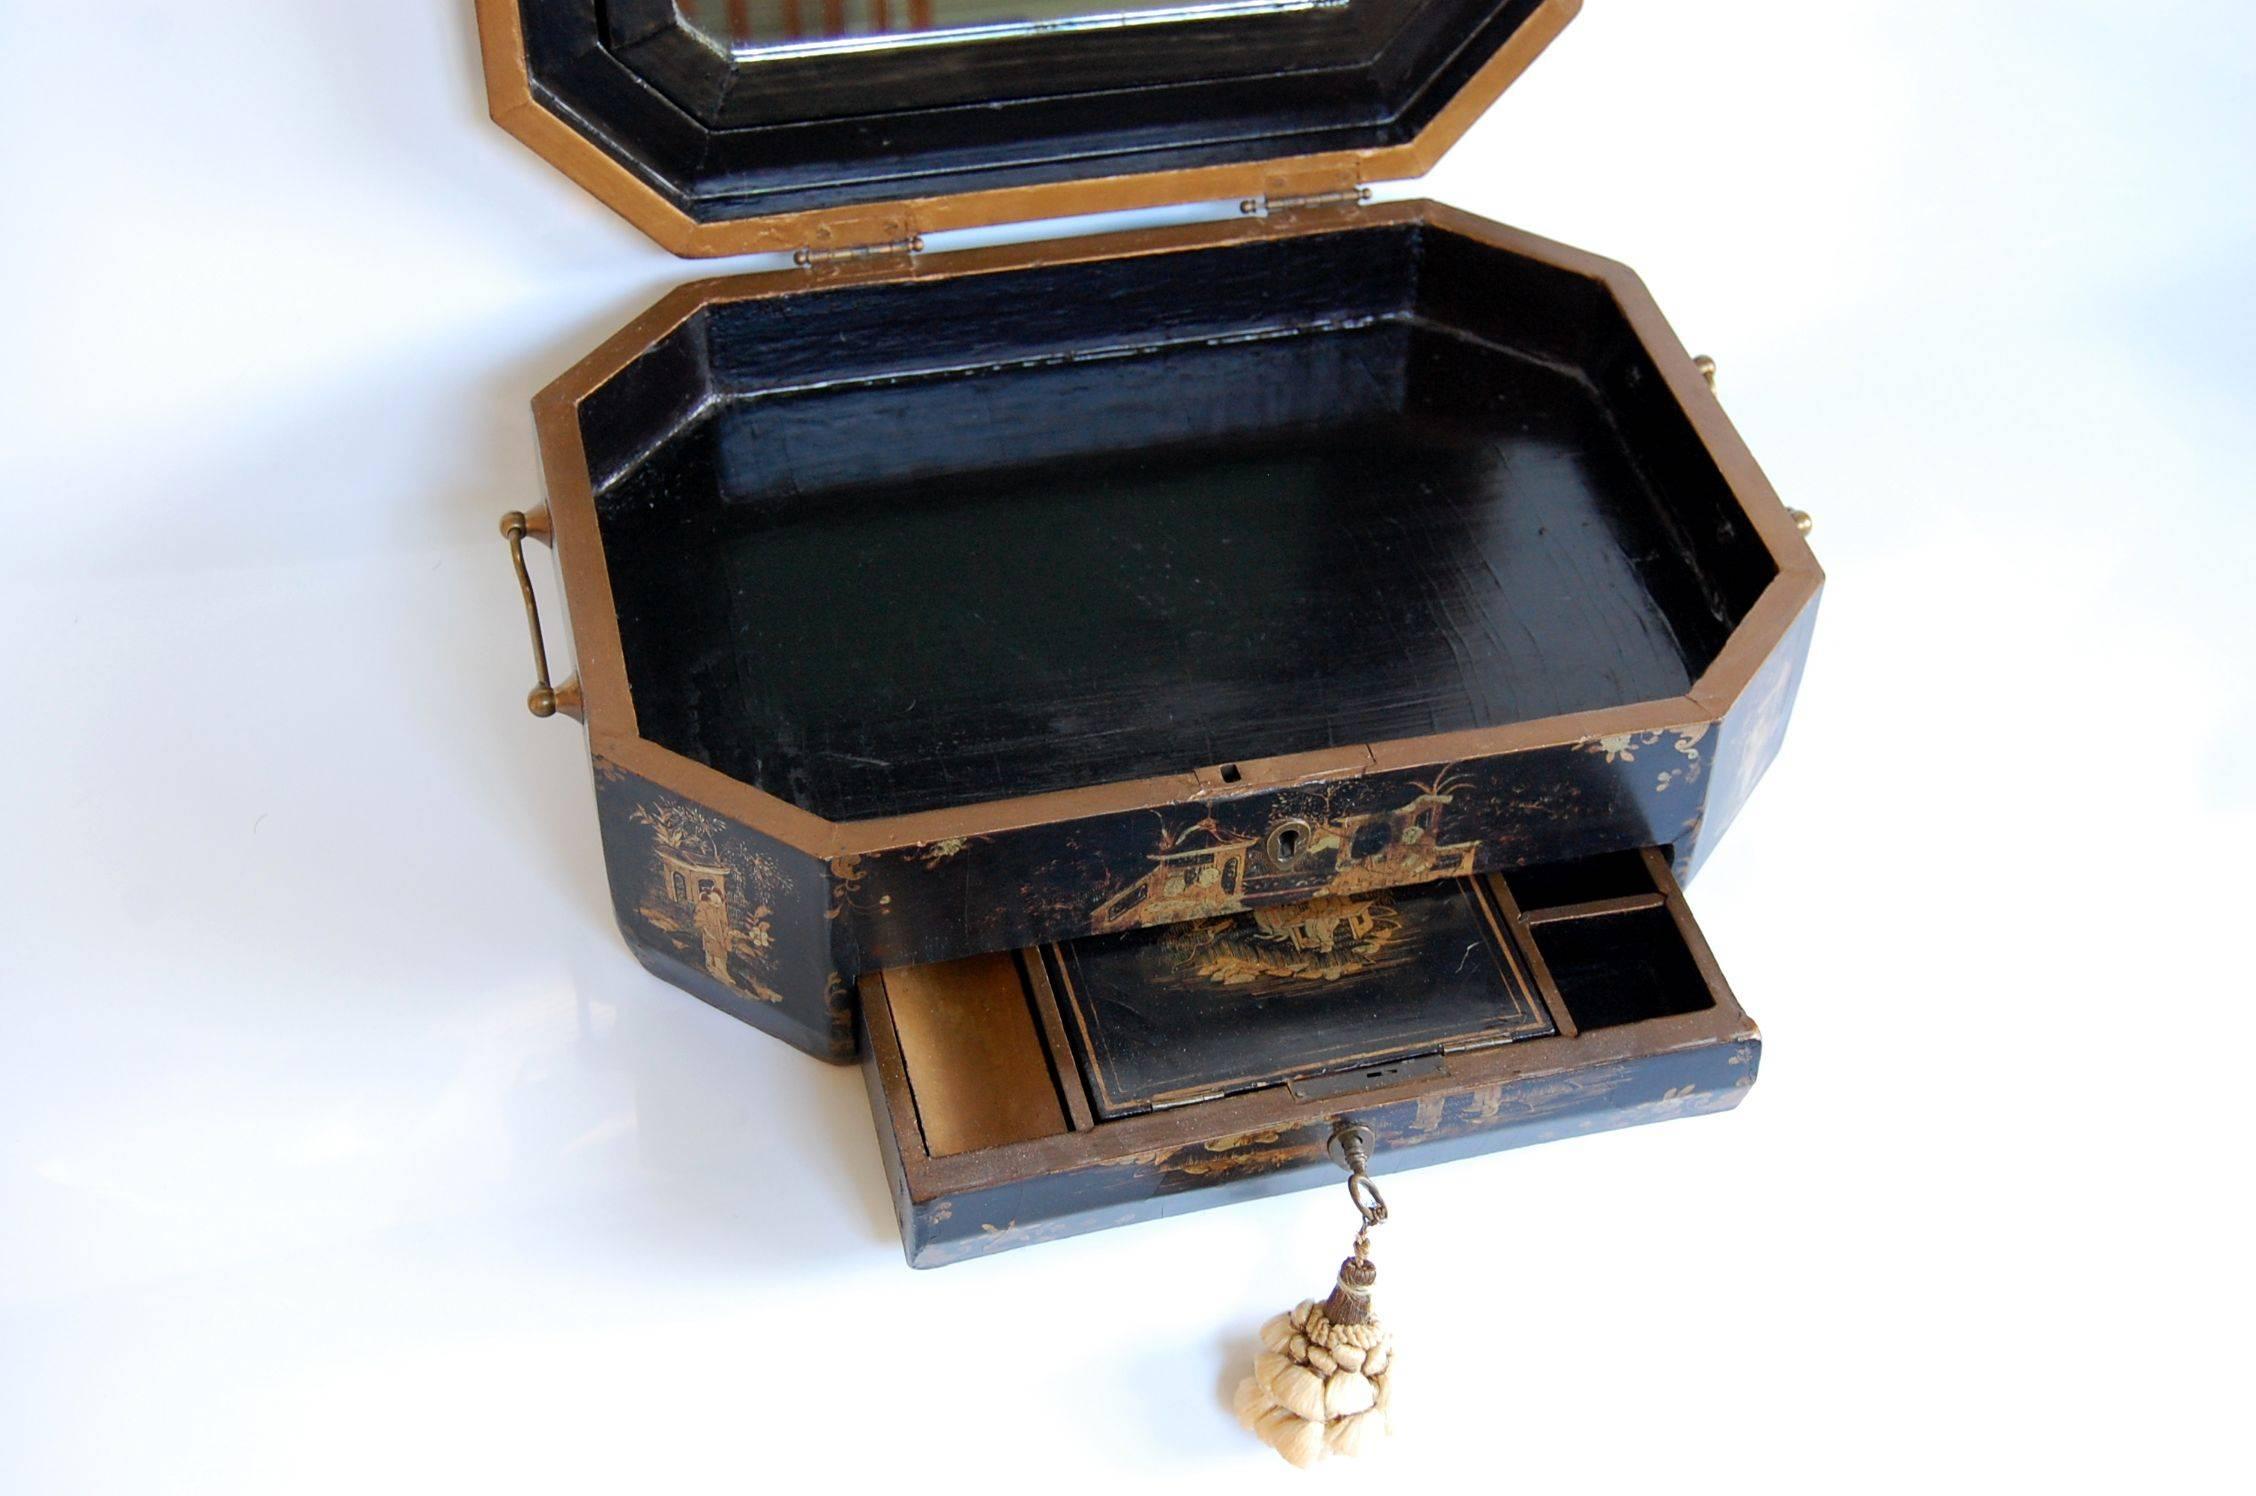 Chinese lacquered sewing box decorated with gold floral patterns and Chinoiserie figures on the top and front, done with exquisite detail, in very fine condition.